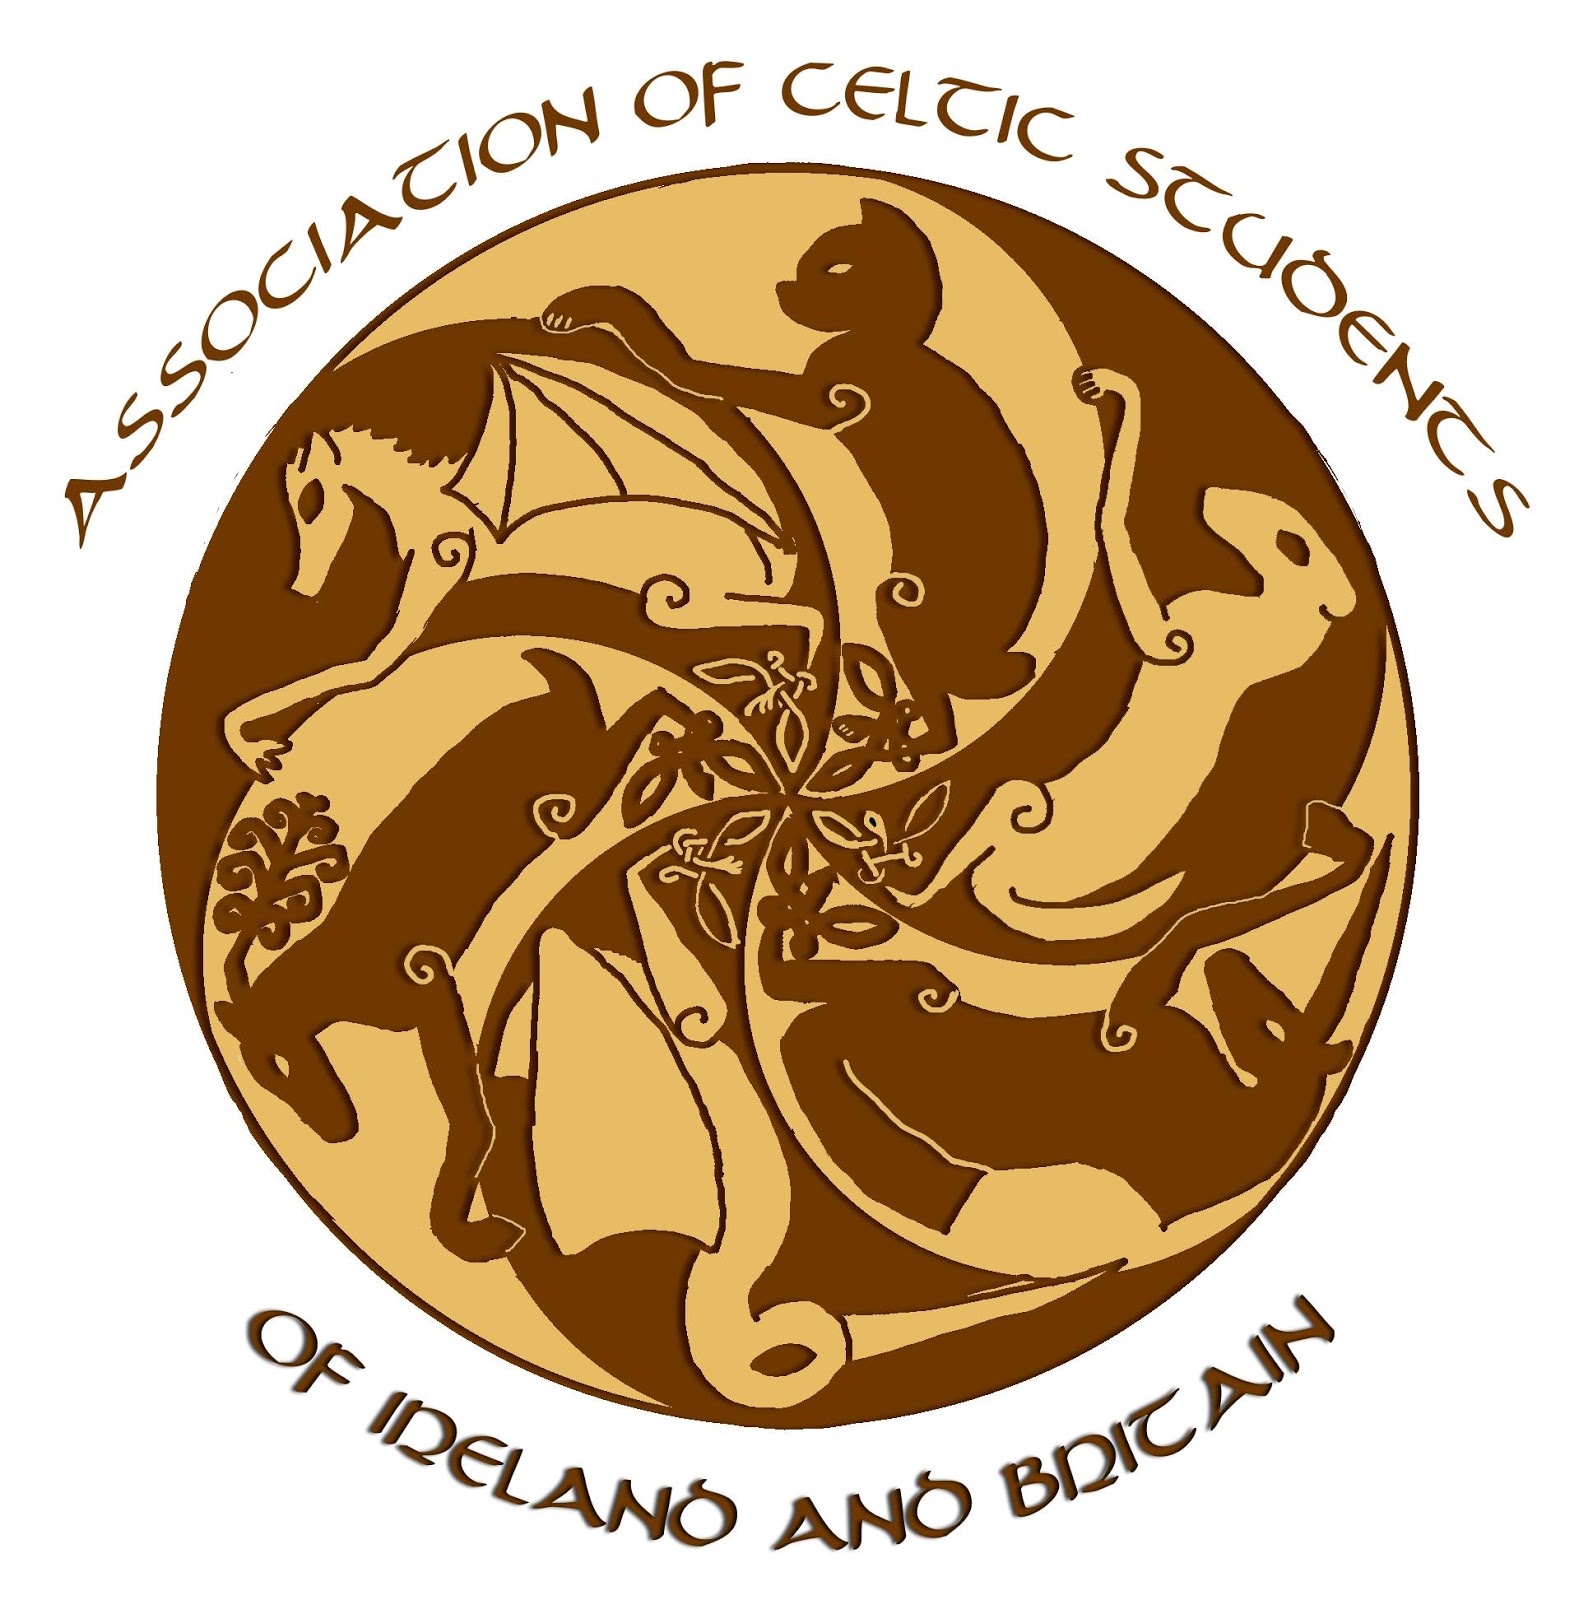 Association of Celtic Students of Ireland and Britain.